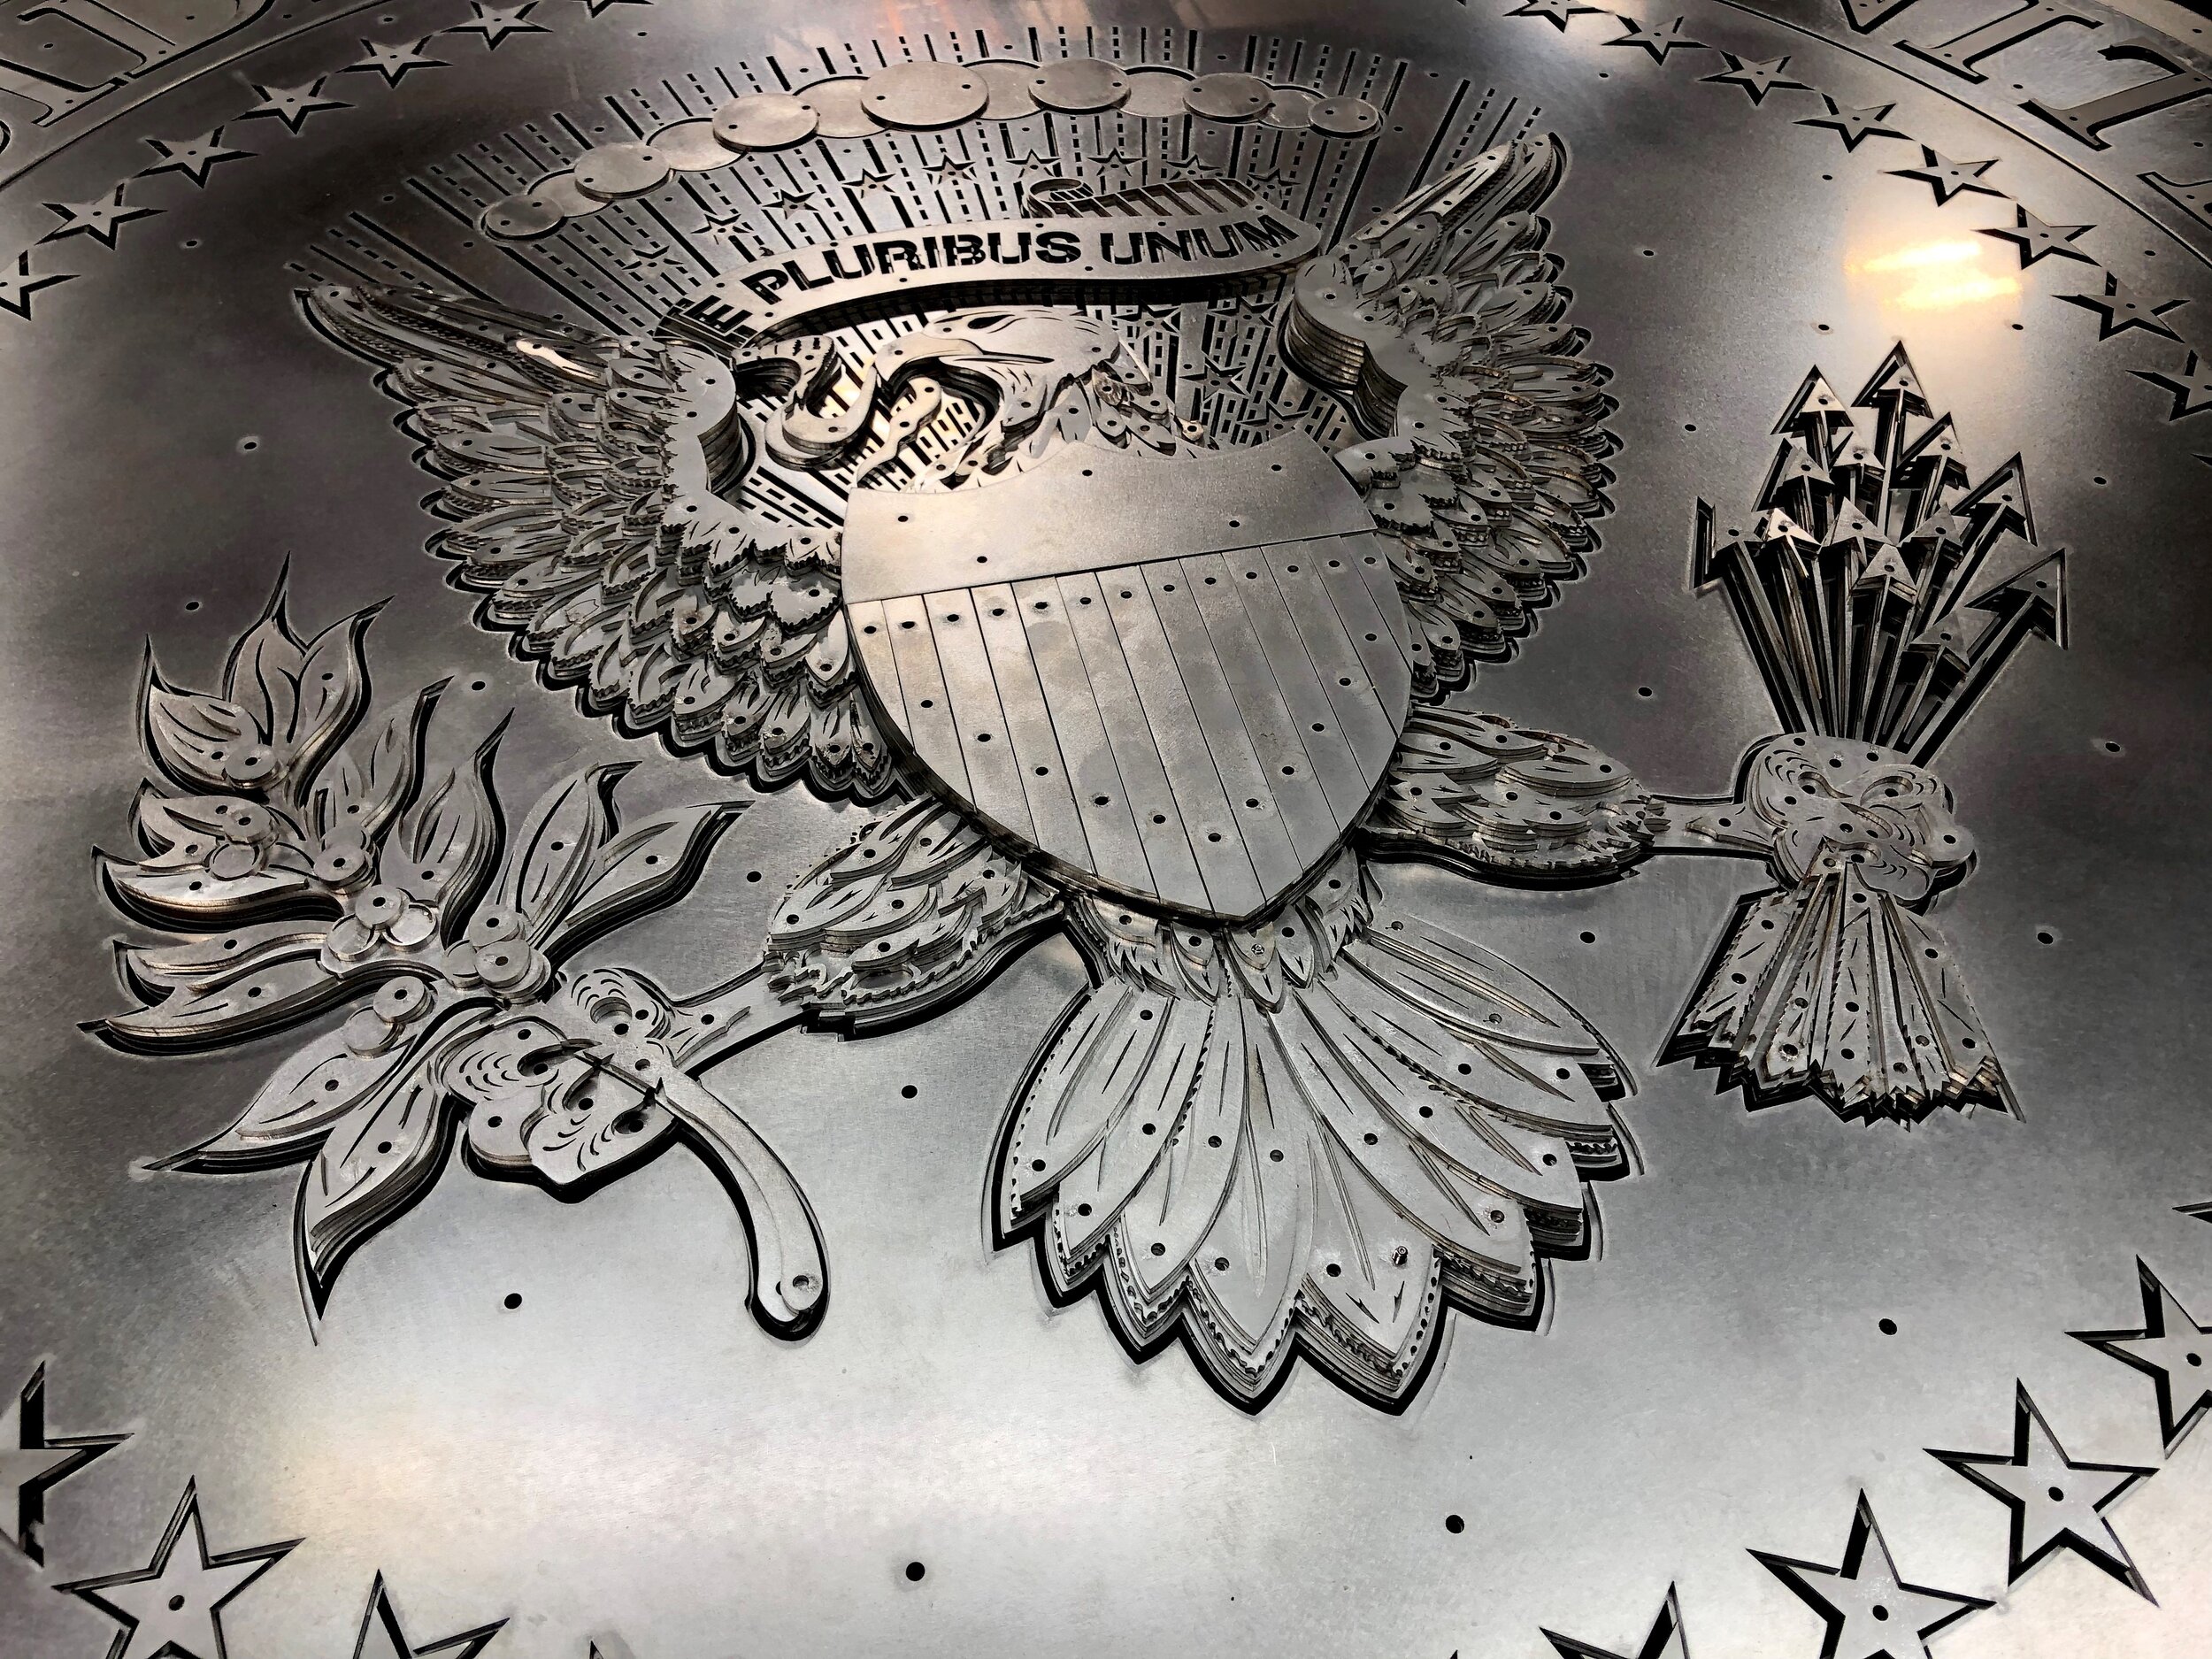 The greatest number of pieces (over 200) will be found in the Presidential Seal Eagle